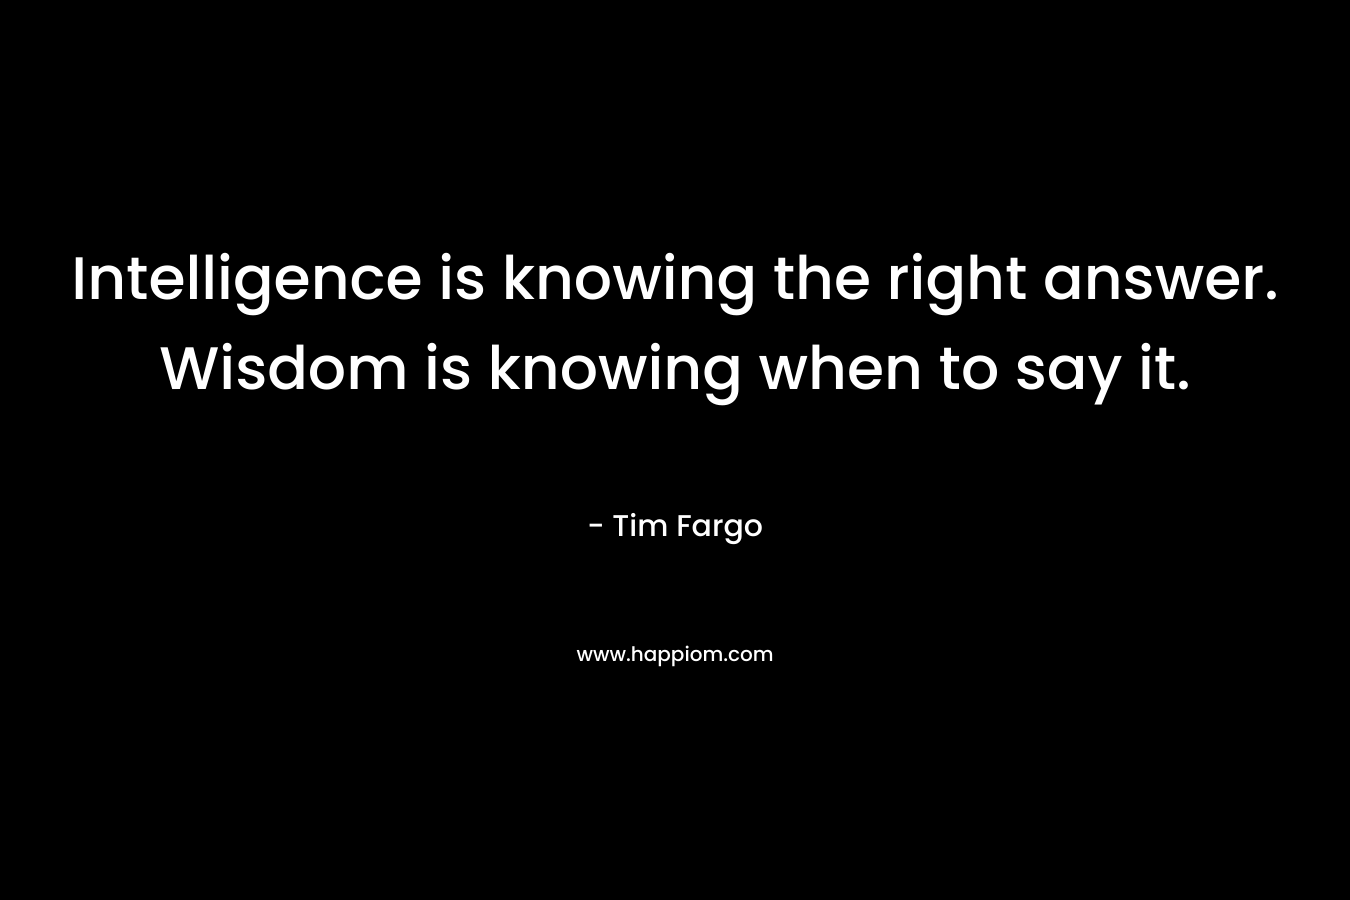 Intelligence is knowing the right answer. Wisdom is knowing when to say it. – Tim Fargo